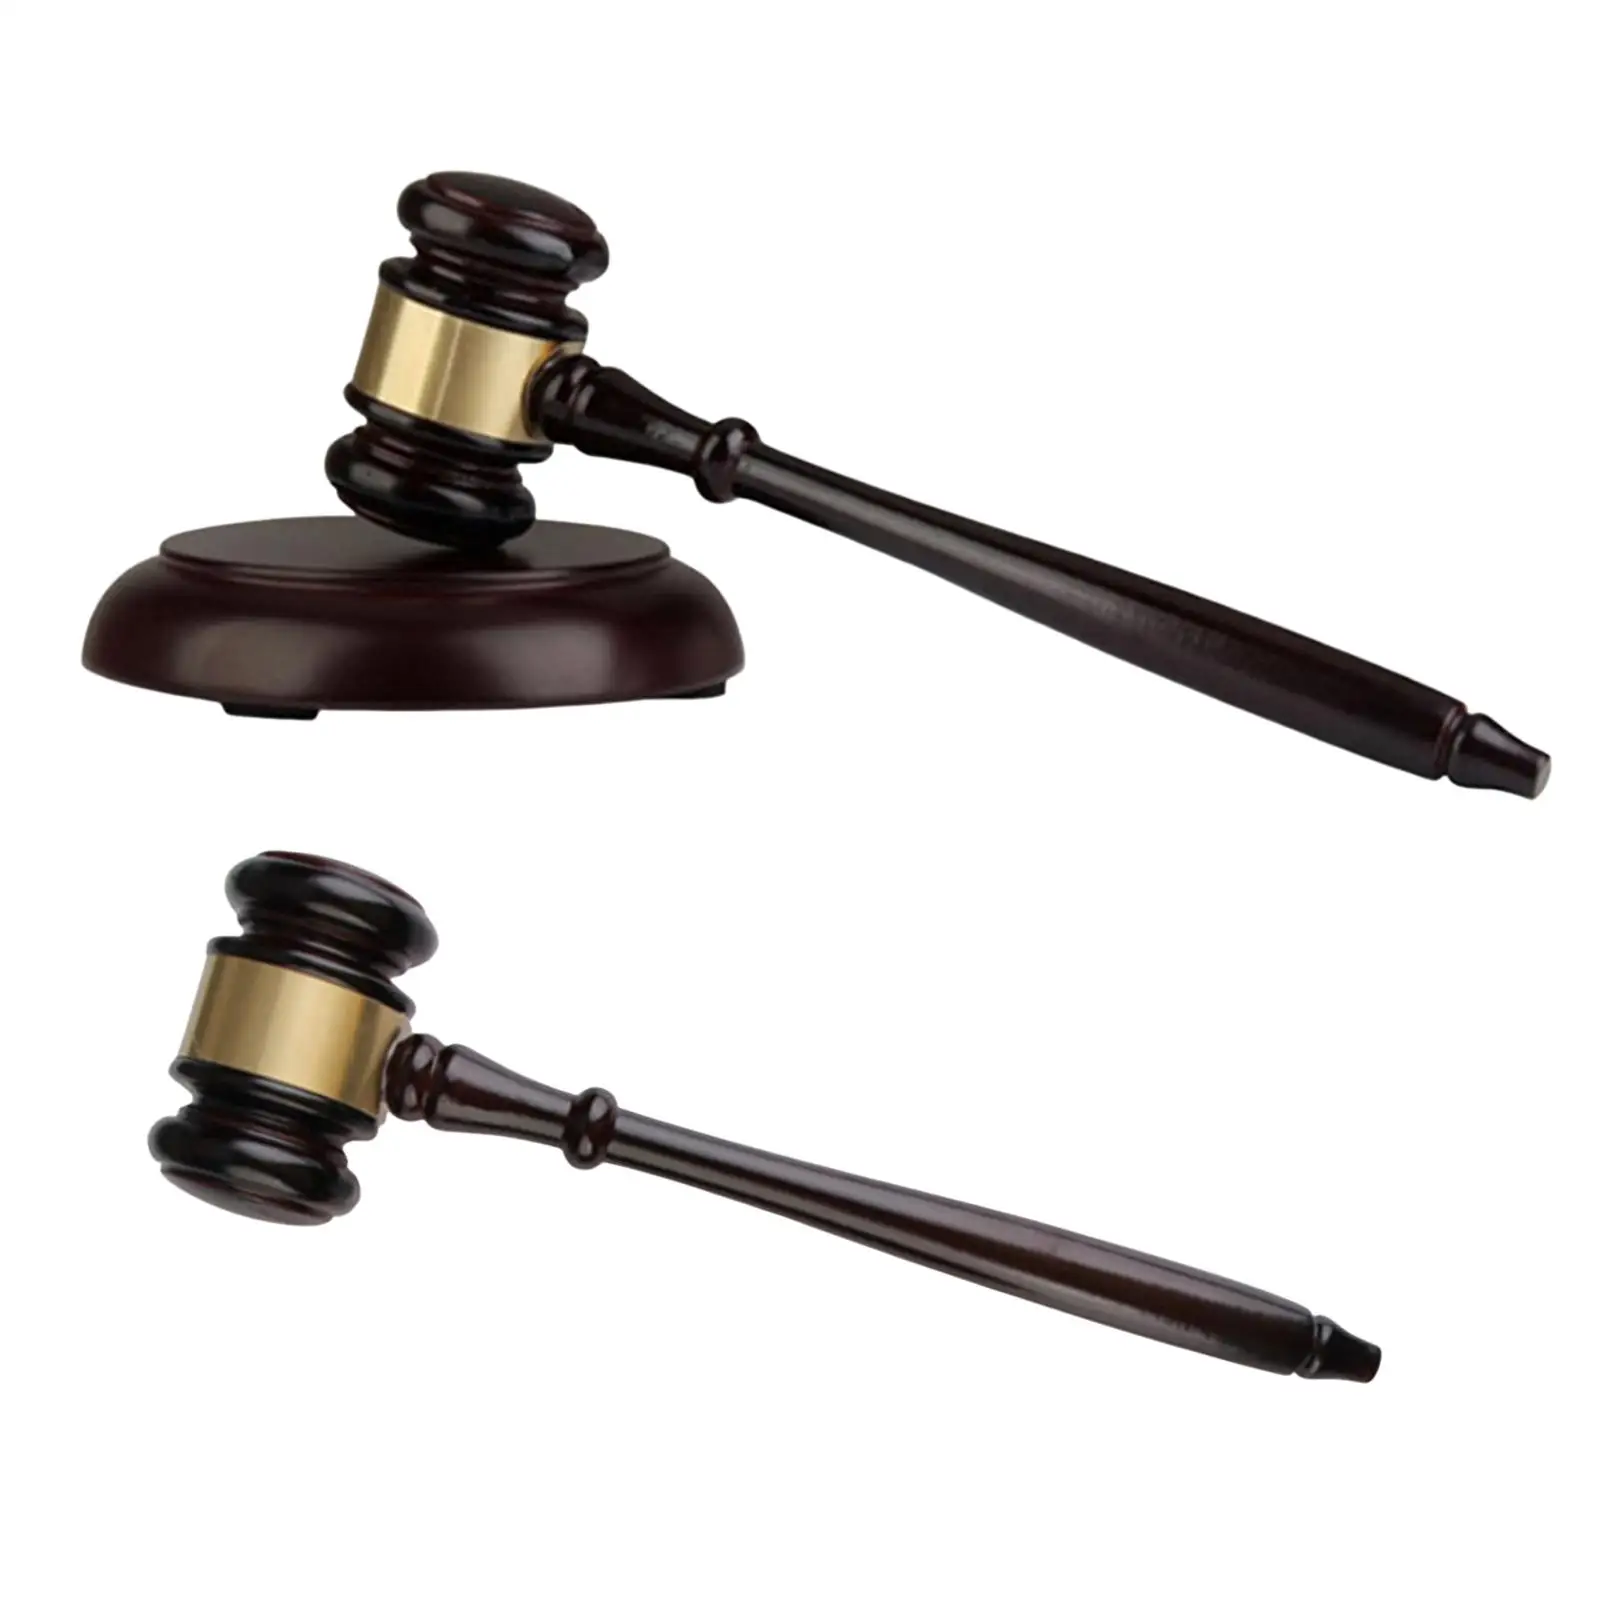 Gavel Toy Party Favors Cosplay Props Handmade lawyer auction